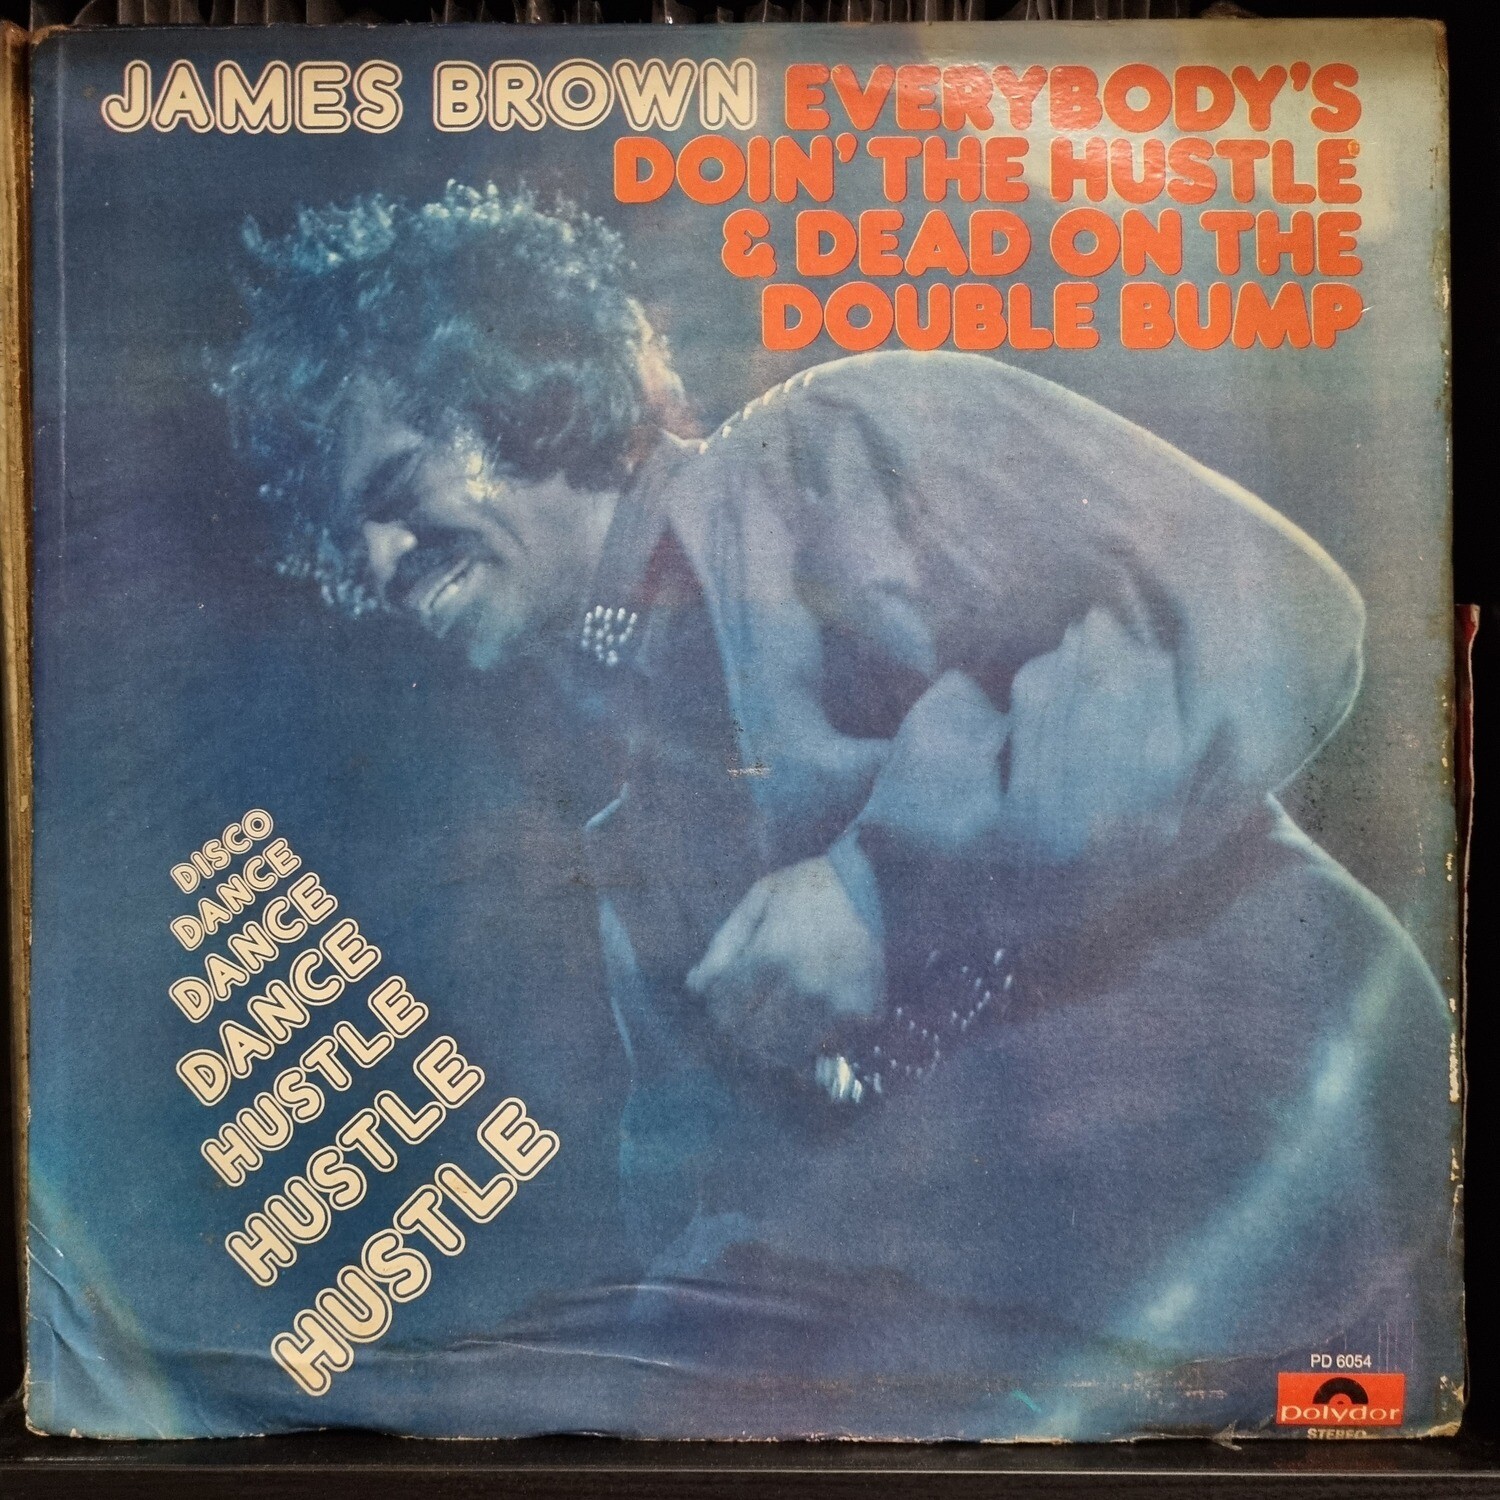 James Brown- Everybody's Doin' The Hustle & Dead On The Double Bump